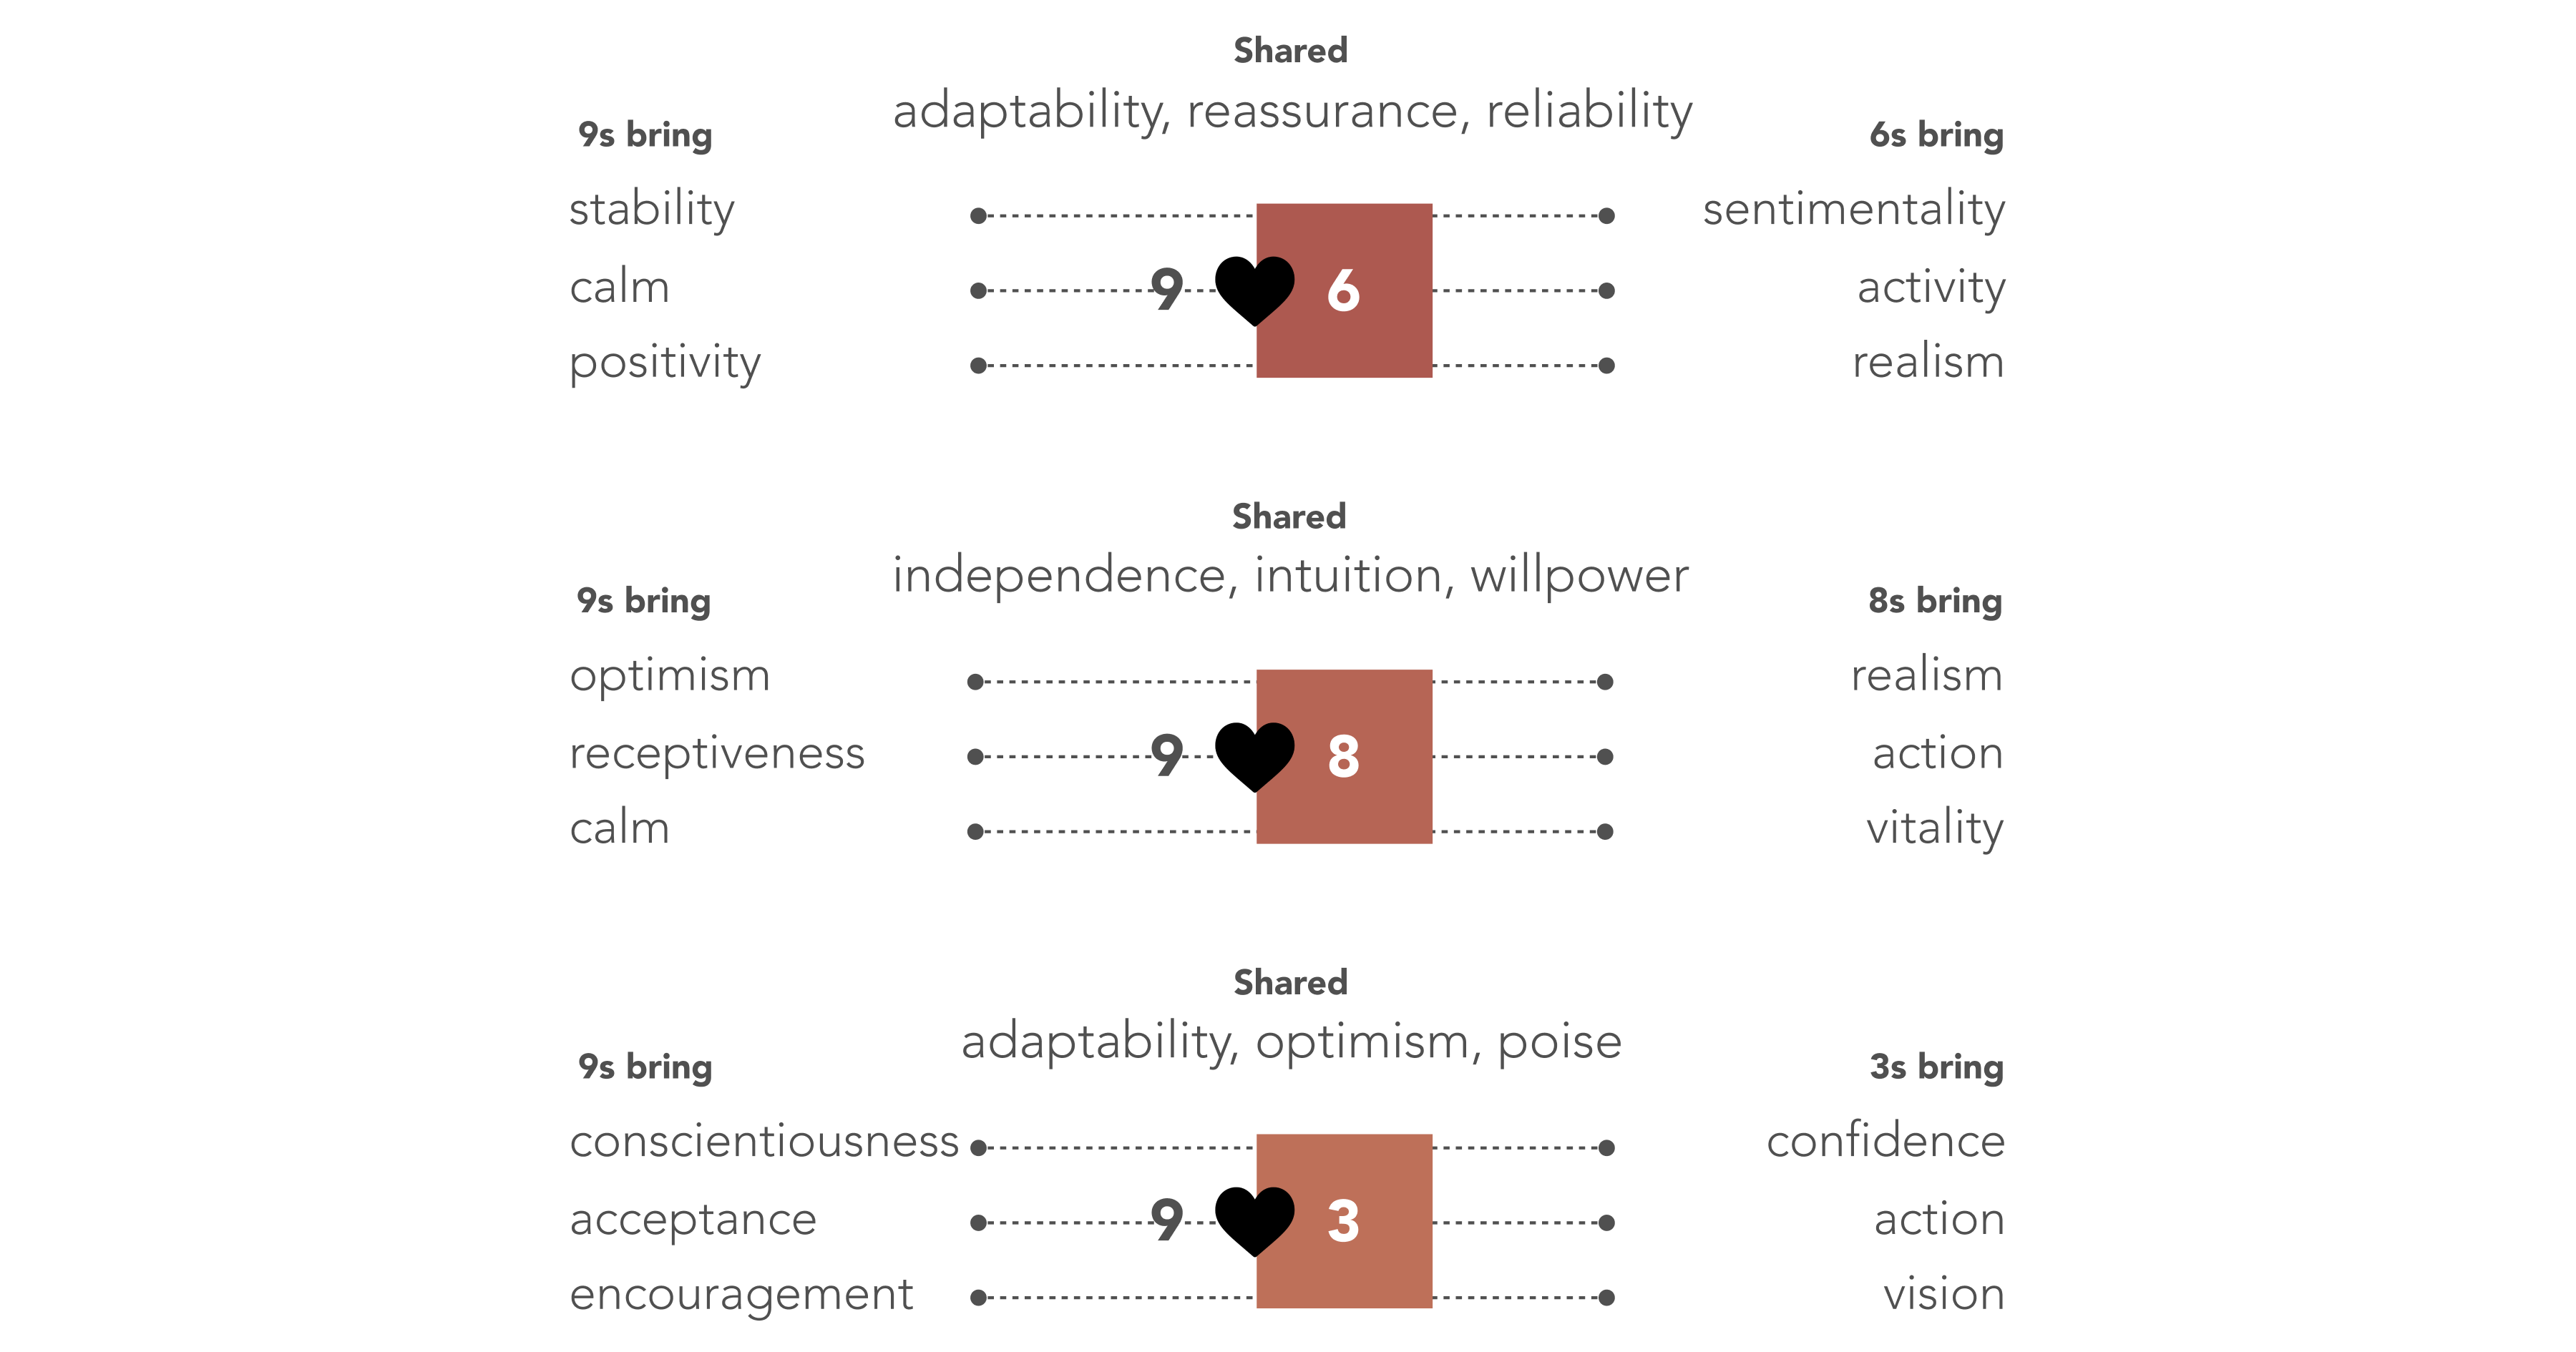 9s and 6s share adaptability, reassurance, reliability. 9s bring stability, calm, positivity, while 6s bring sentimentality, activity, realism. 9s and 8s share independence, intuition, willpower. 9s bring optimism, receptiveness, calm, while 8s bring realism, action, vitality. 9s and 3s share adaptability, optimism, poise. 9s bring conscientiousness, acceptance, encouragement, while 3s bring confidence, action, vision.